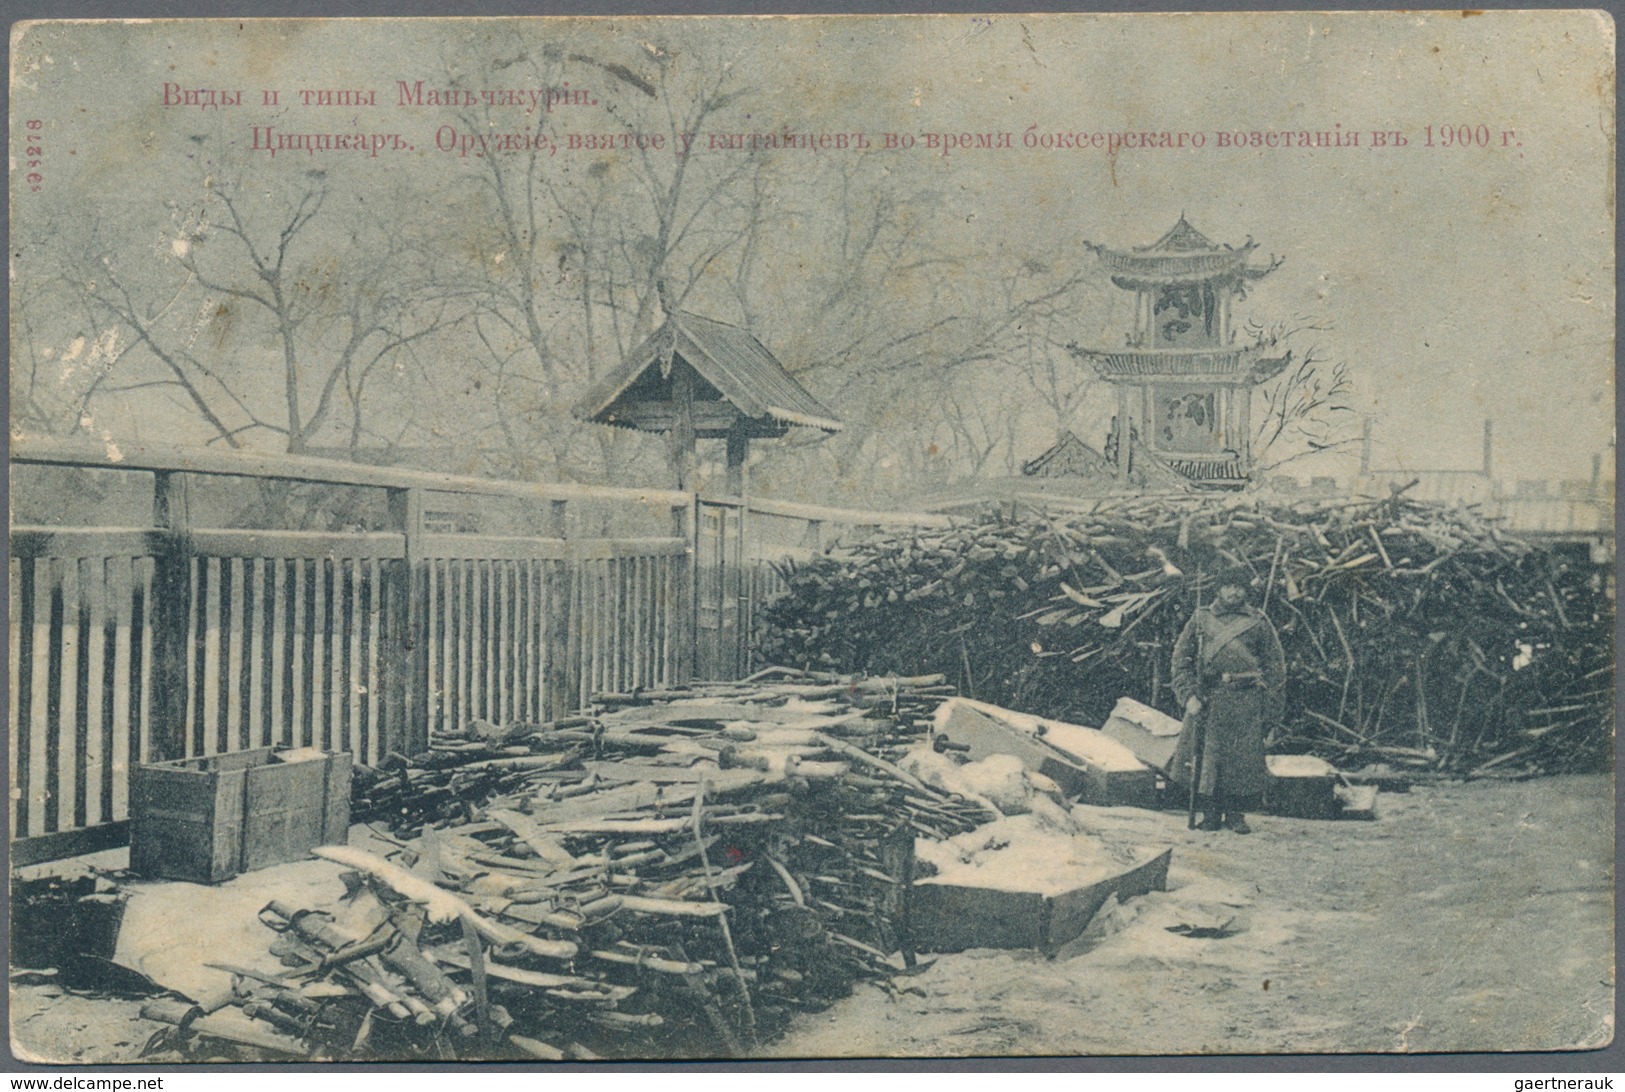 Russische Post In China: 06.09.1905 Russo-Japanese War Picture-postcard With View Of Tsitsikar (capt - China